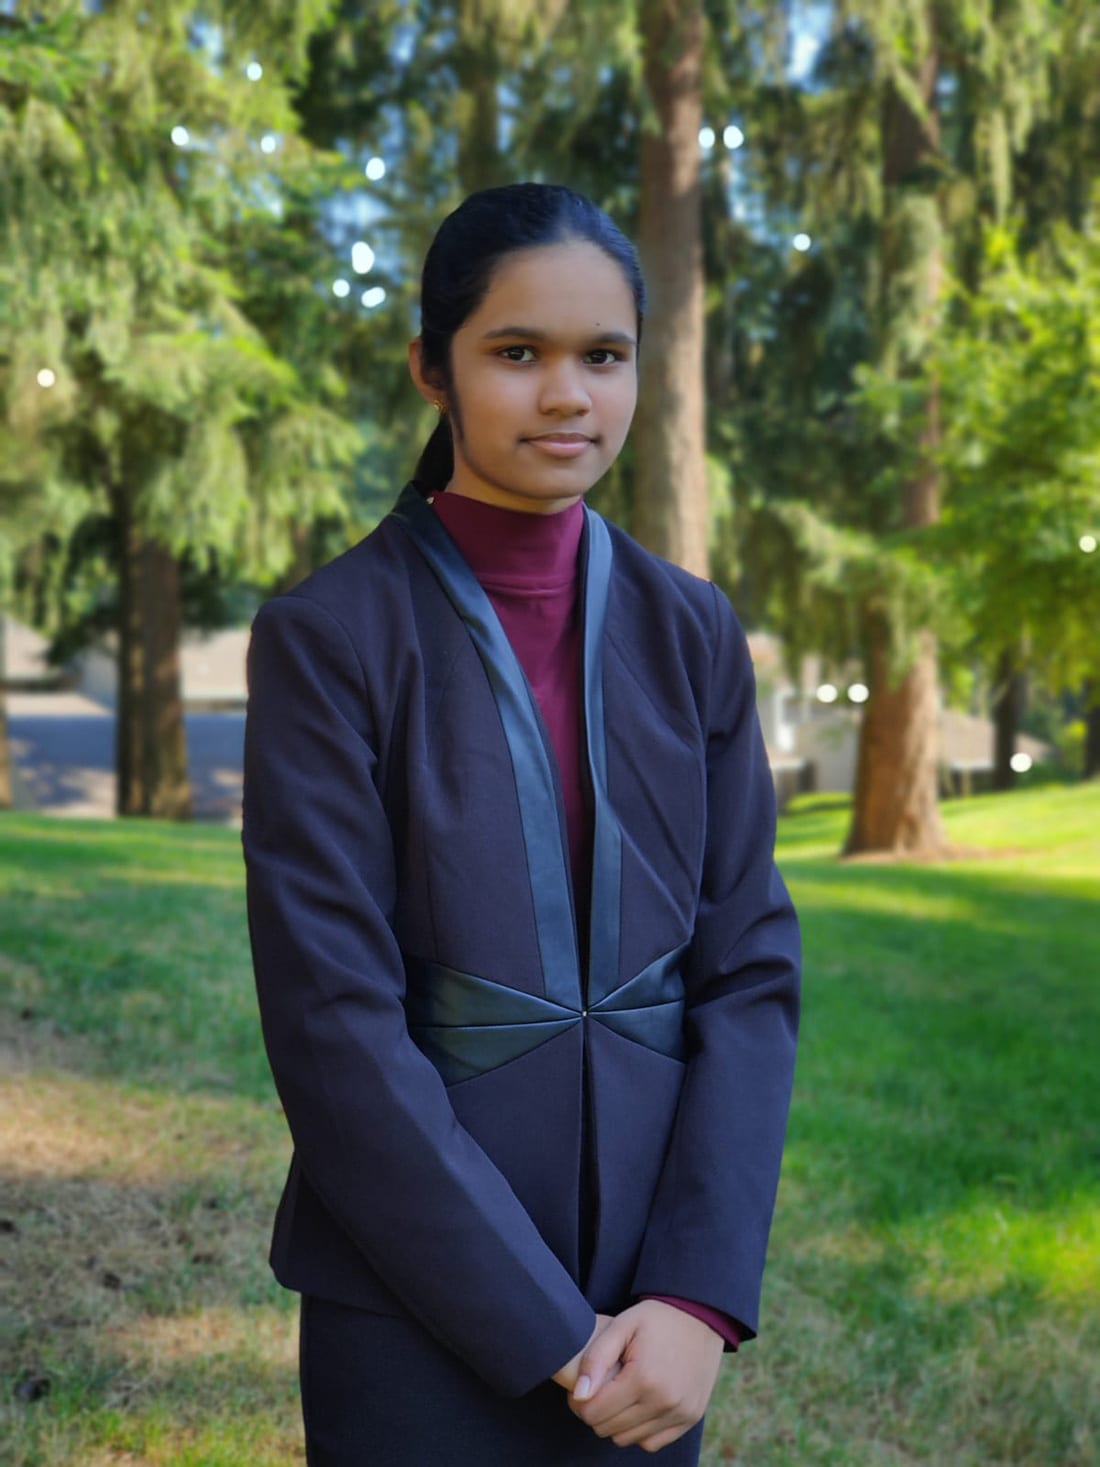 Pisupati is a part of the Pacific Northwest’s premier Model United Nations conference, where she hopes to educate students about the nation’s most pressing issues